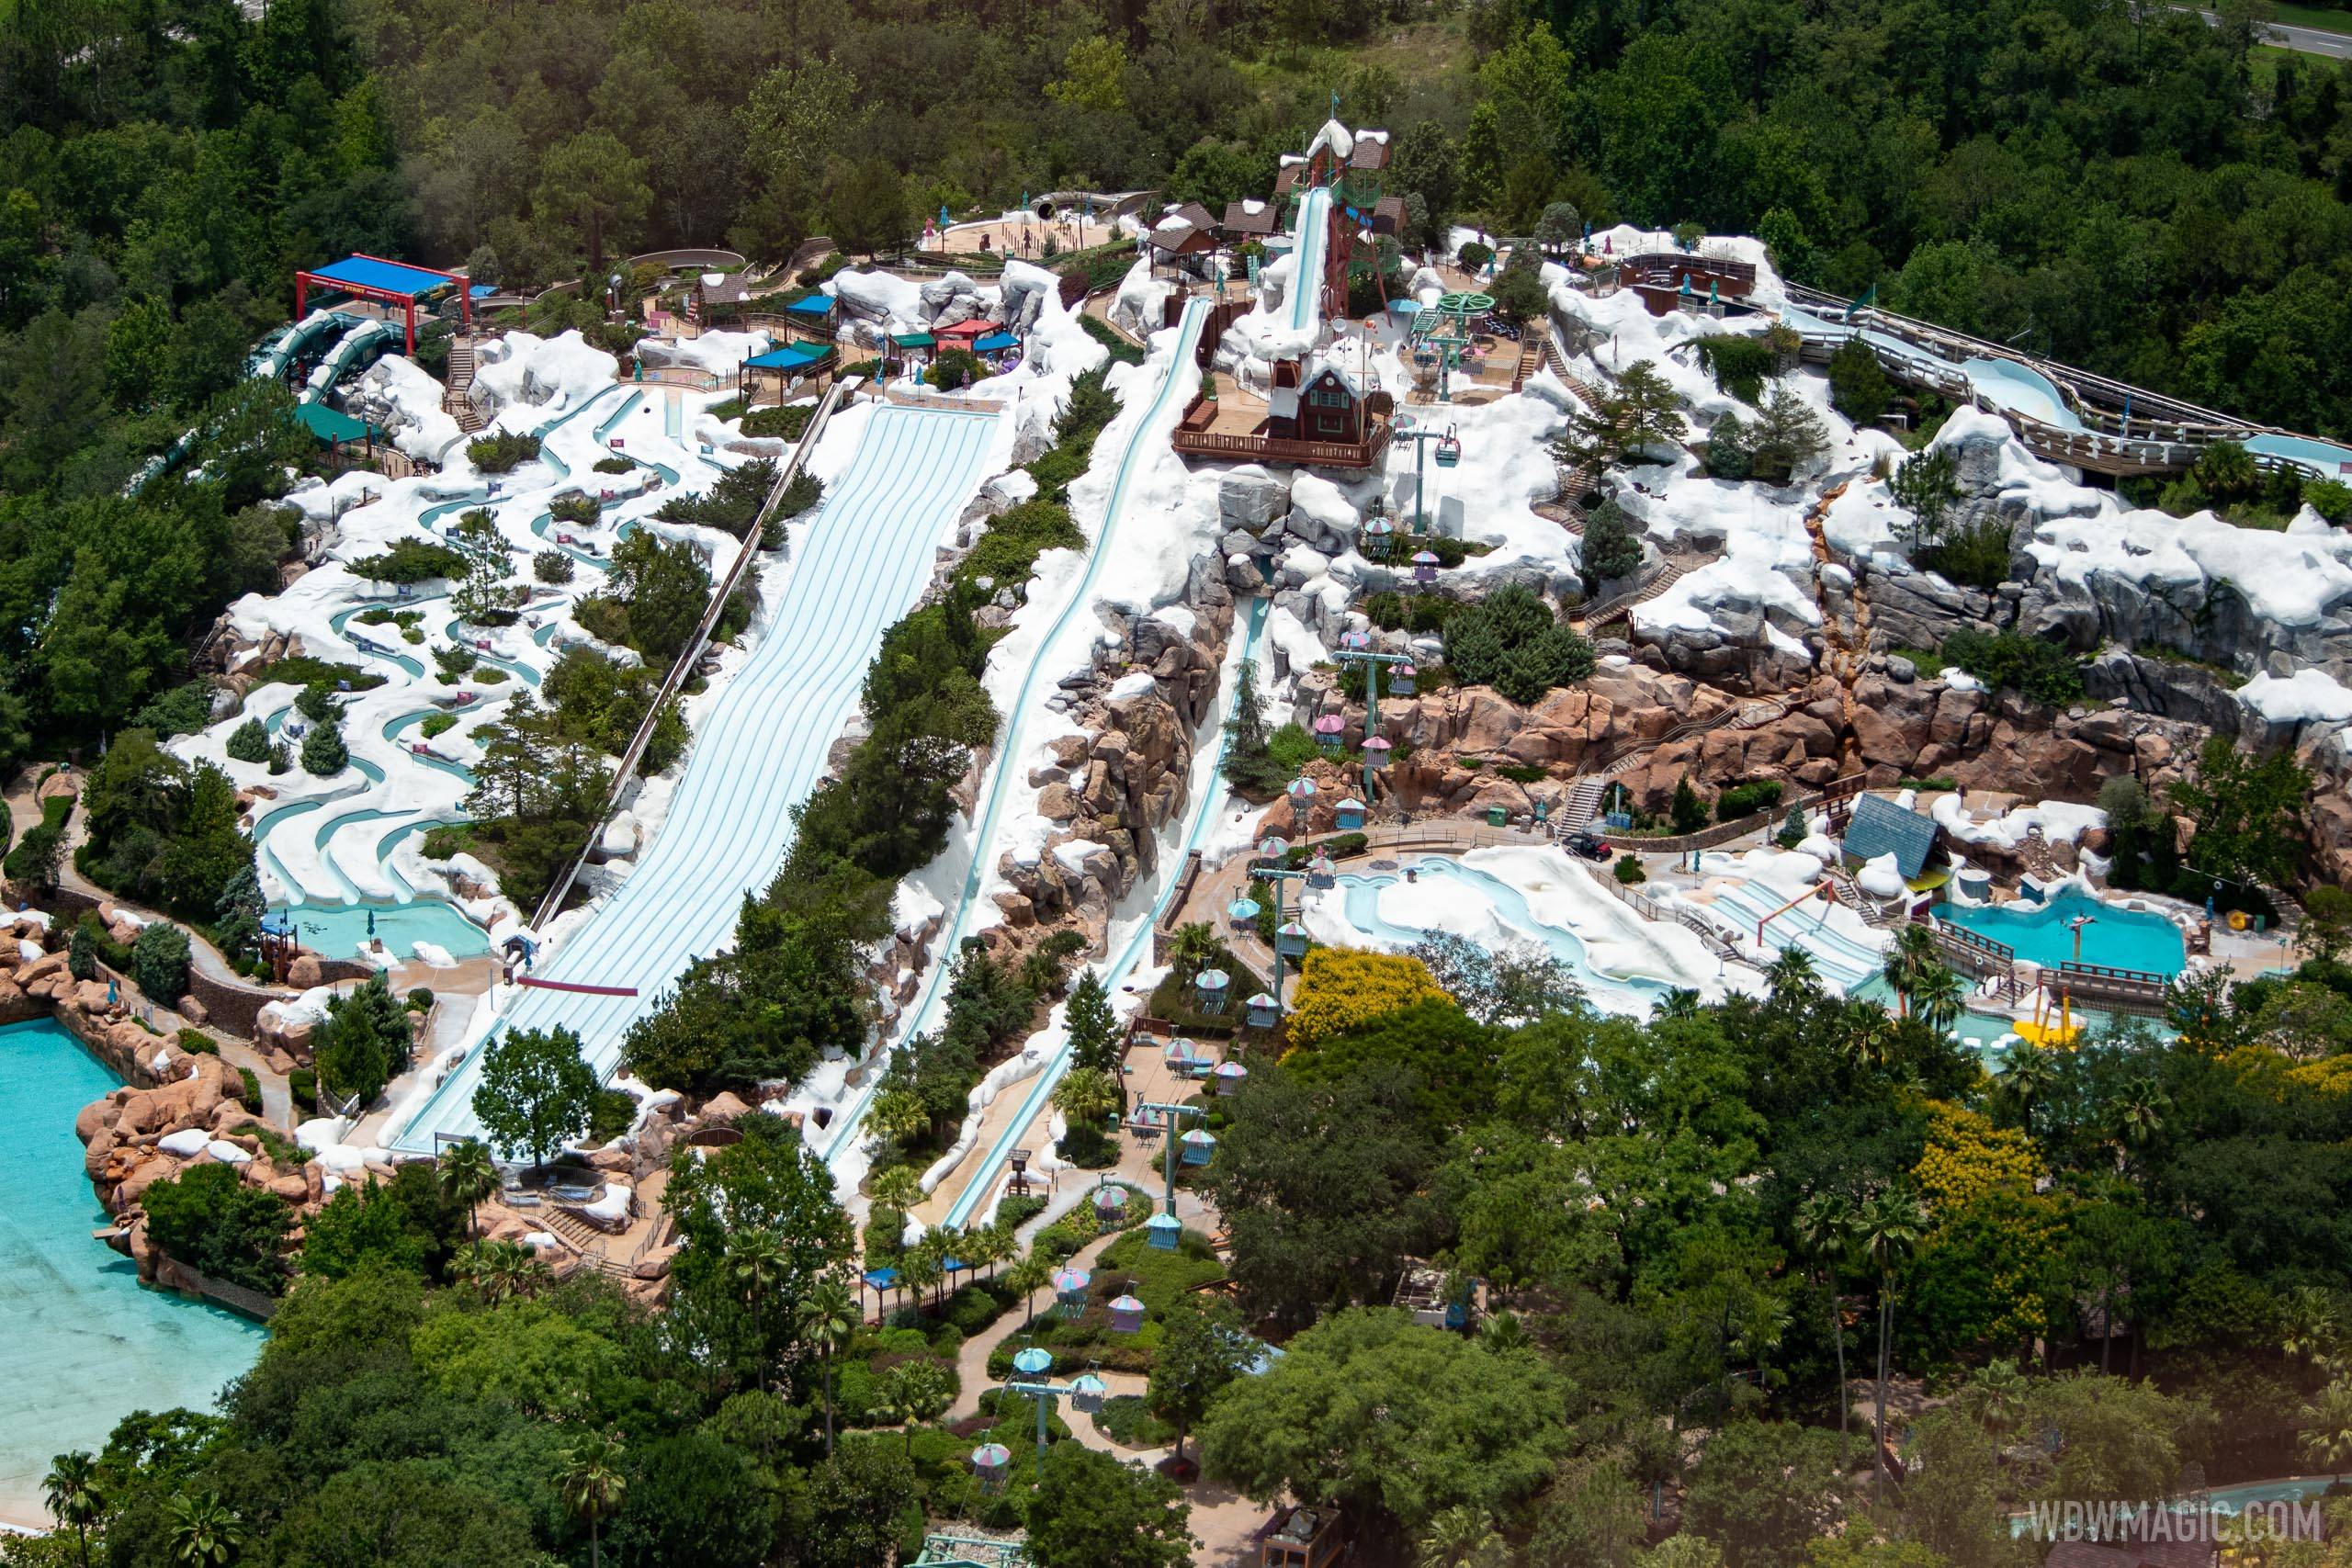 Something new may be coming to Blizzard Beach